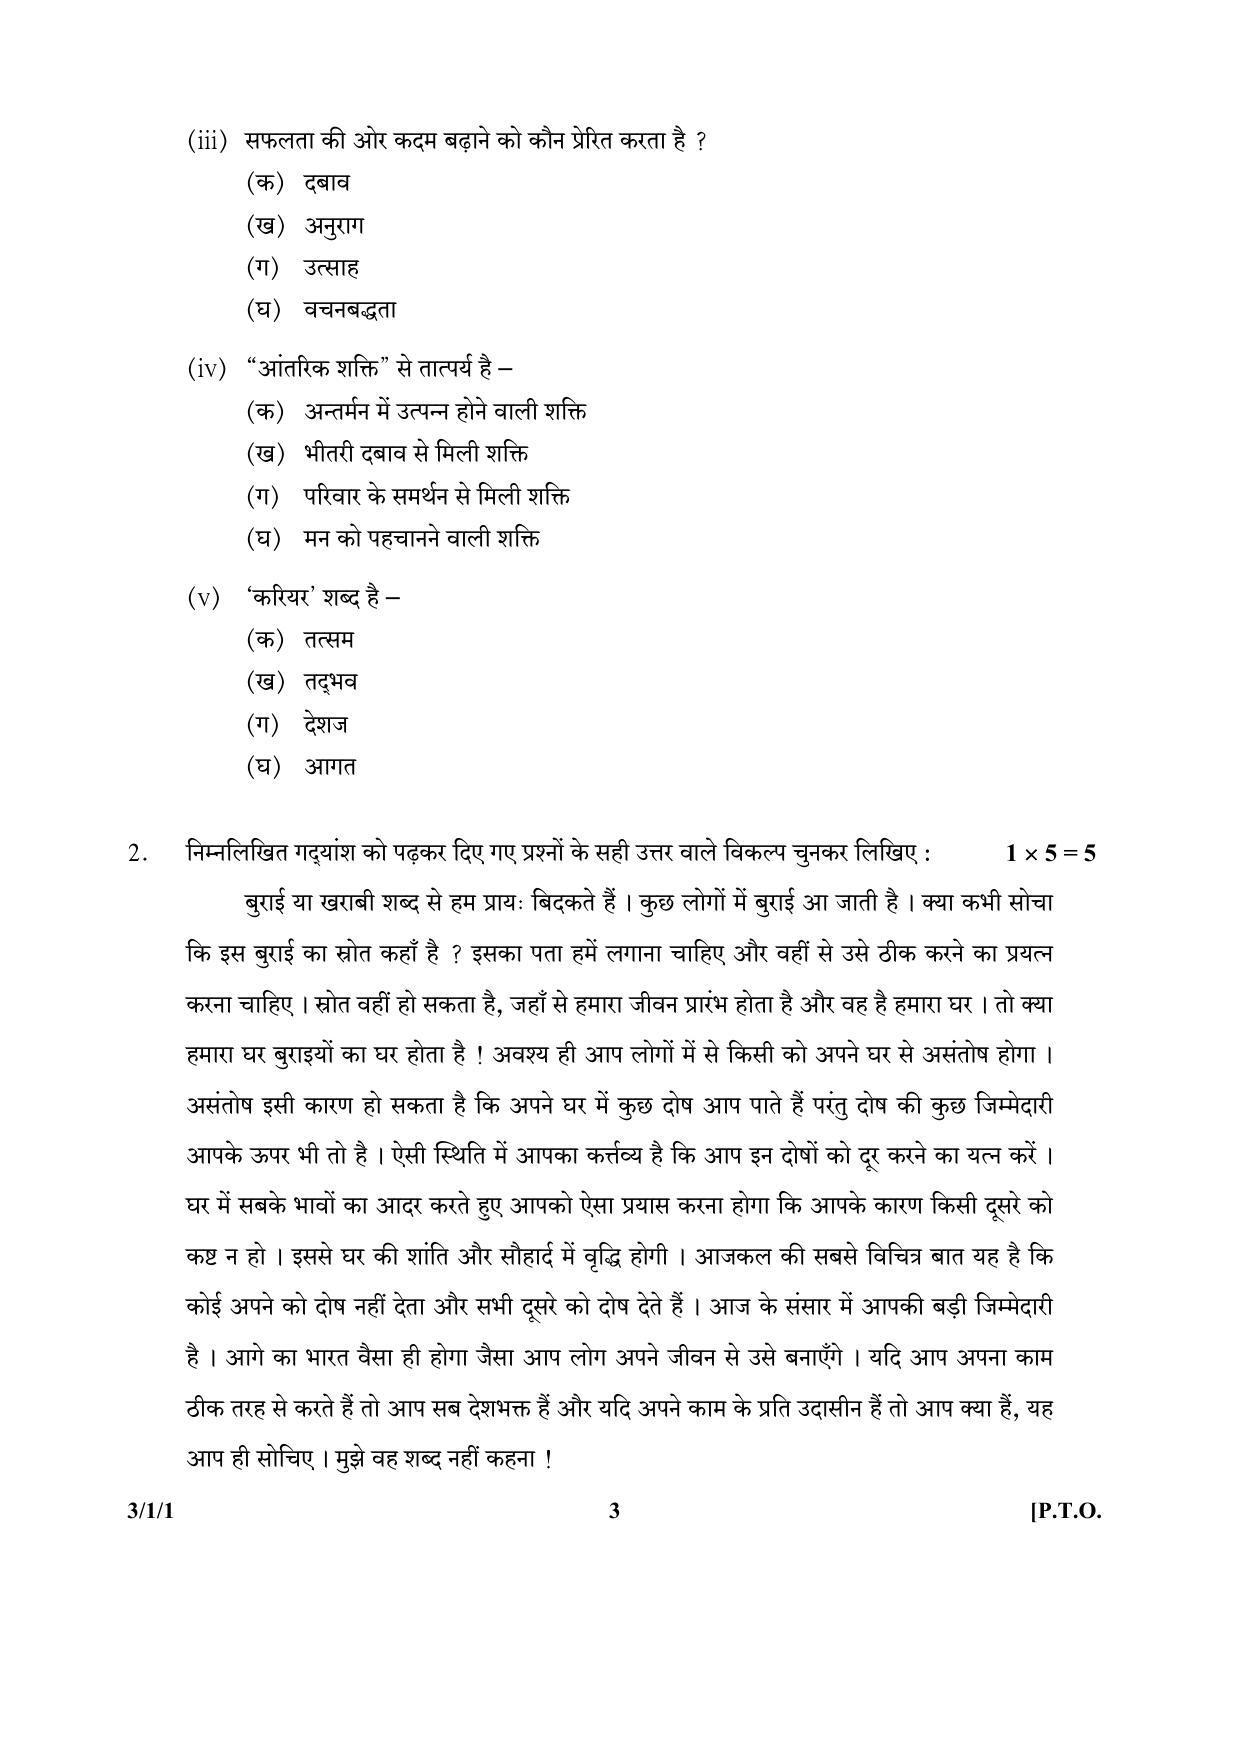 CBSE Class 10 3-1-1 (Hindi) 2017-comptt Question Paper - Page 3